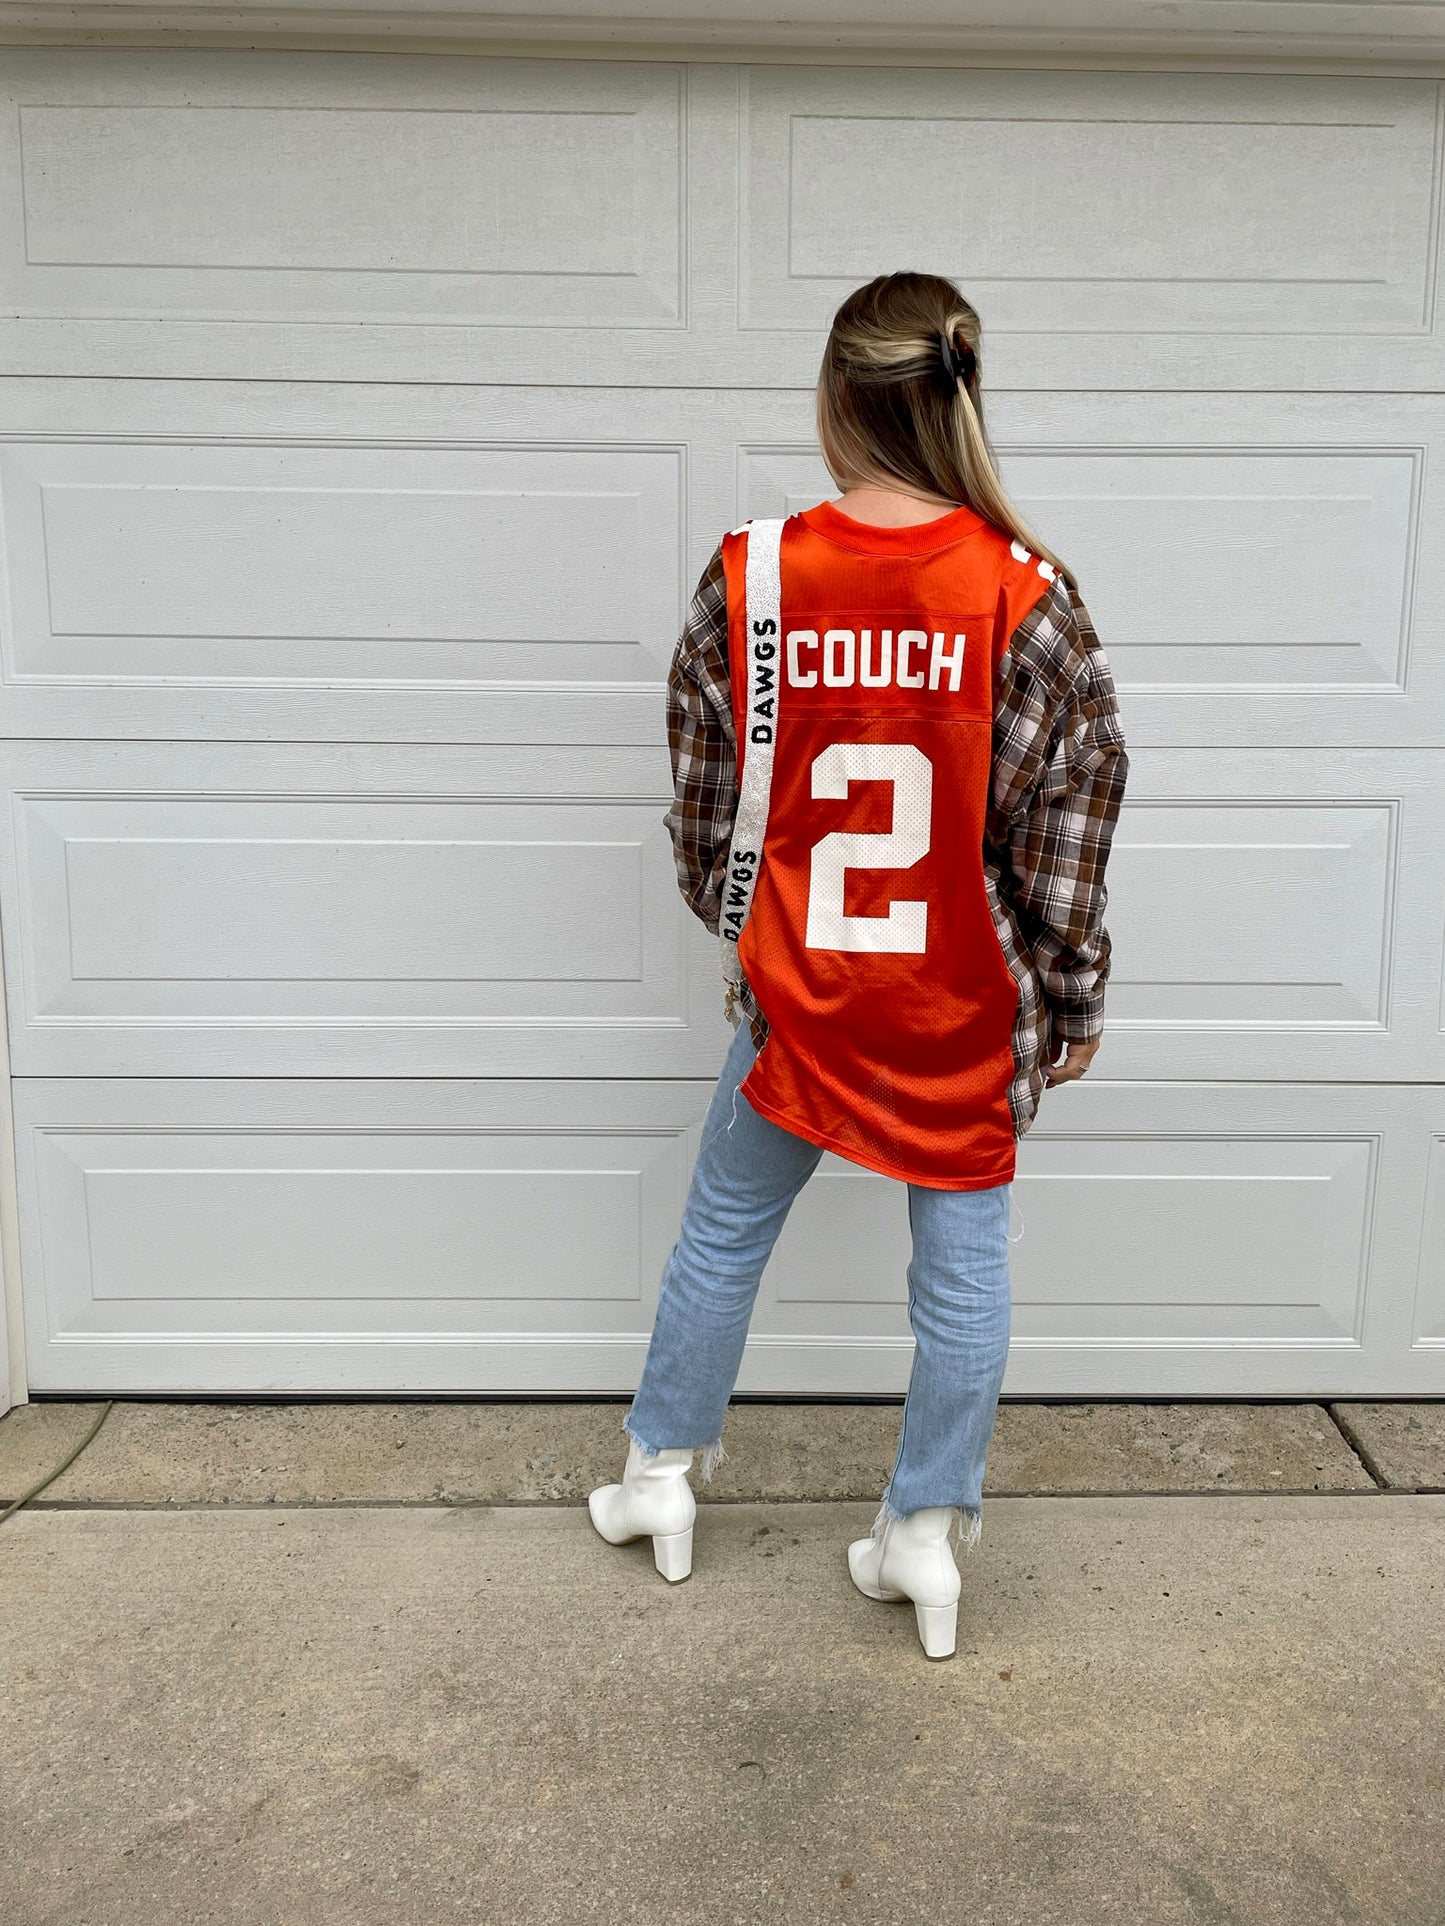 #2 COUCH JERSEY X FLANNEL